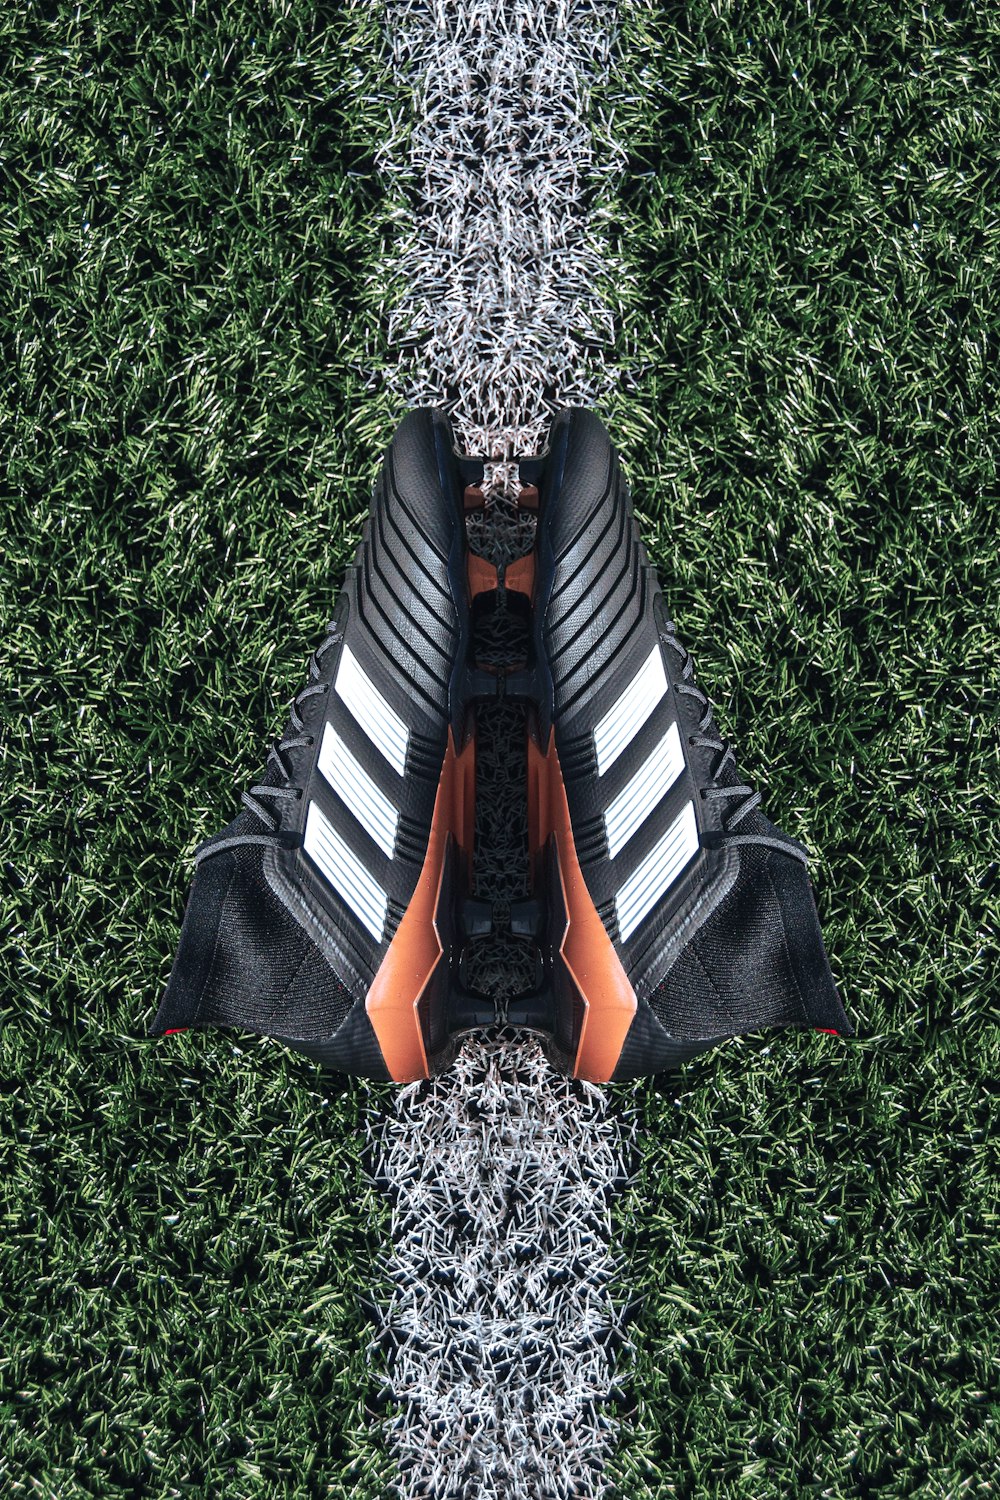 pair of black Adidas cleats on grass field